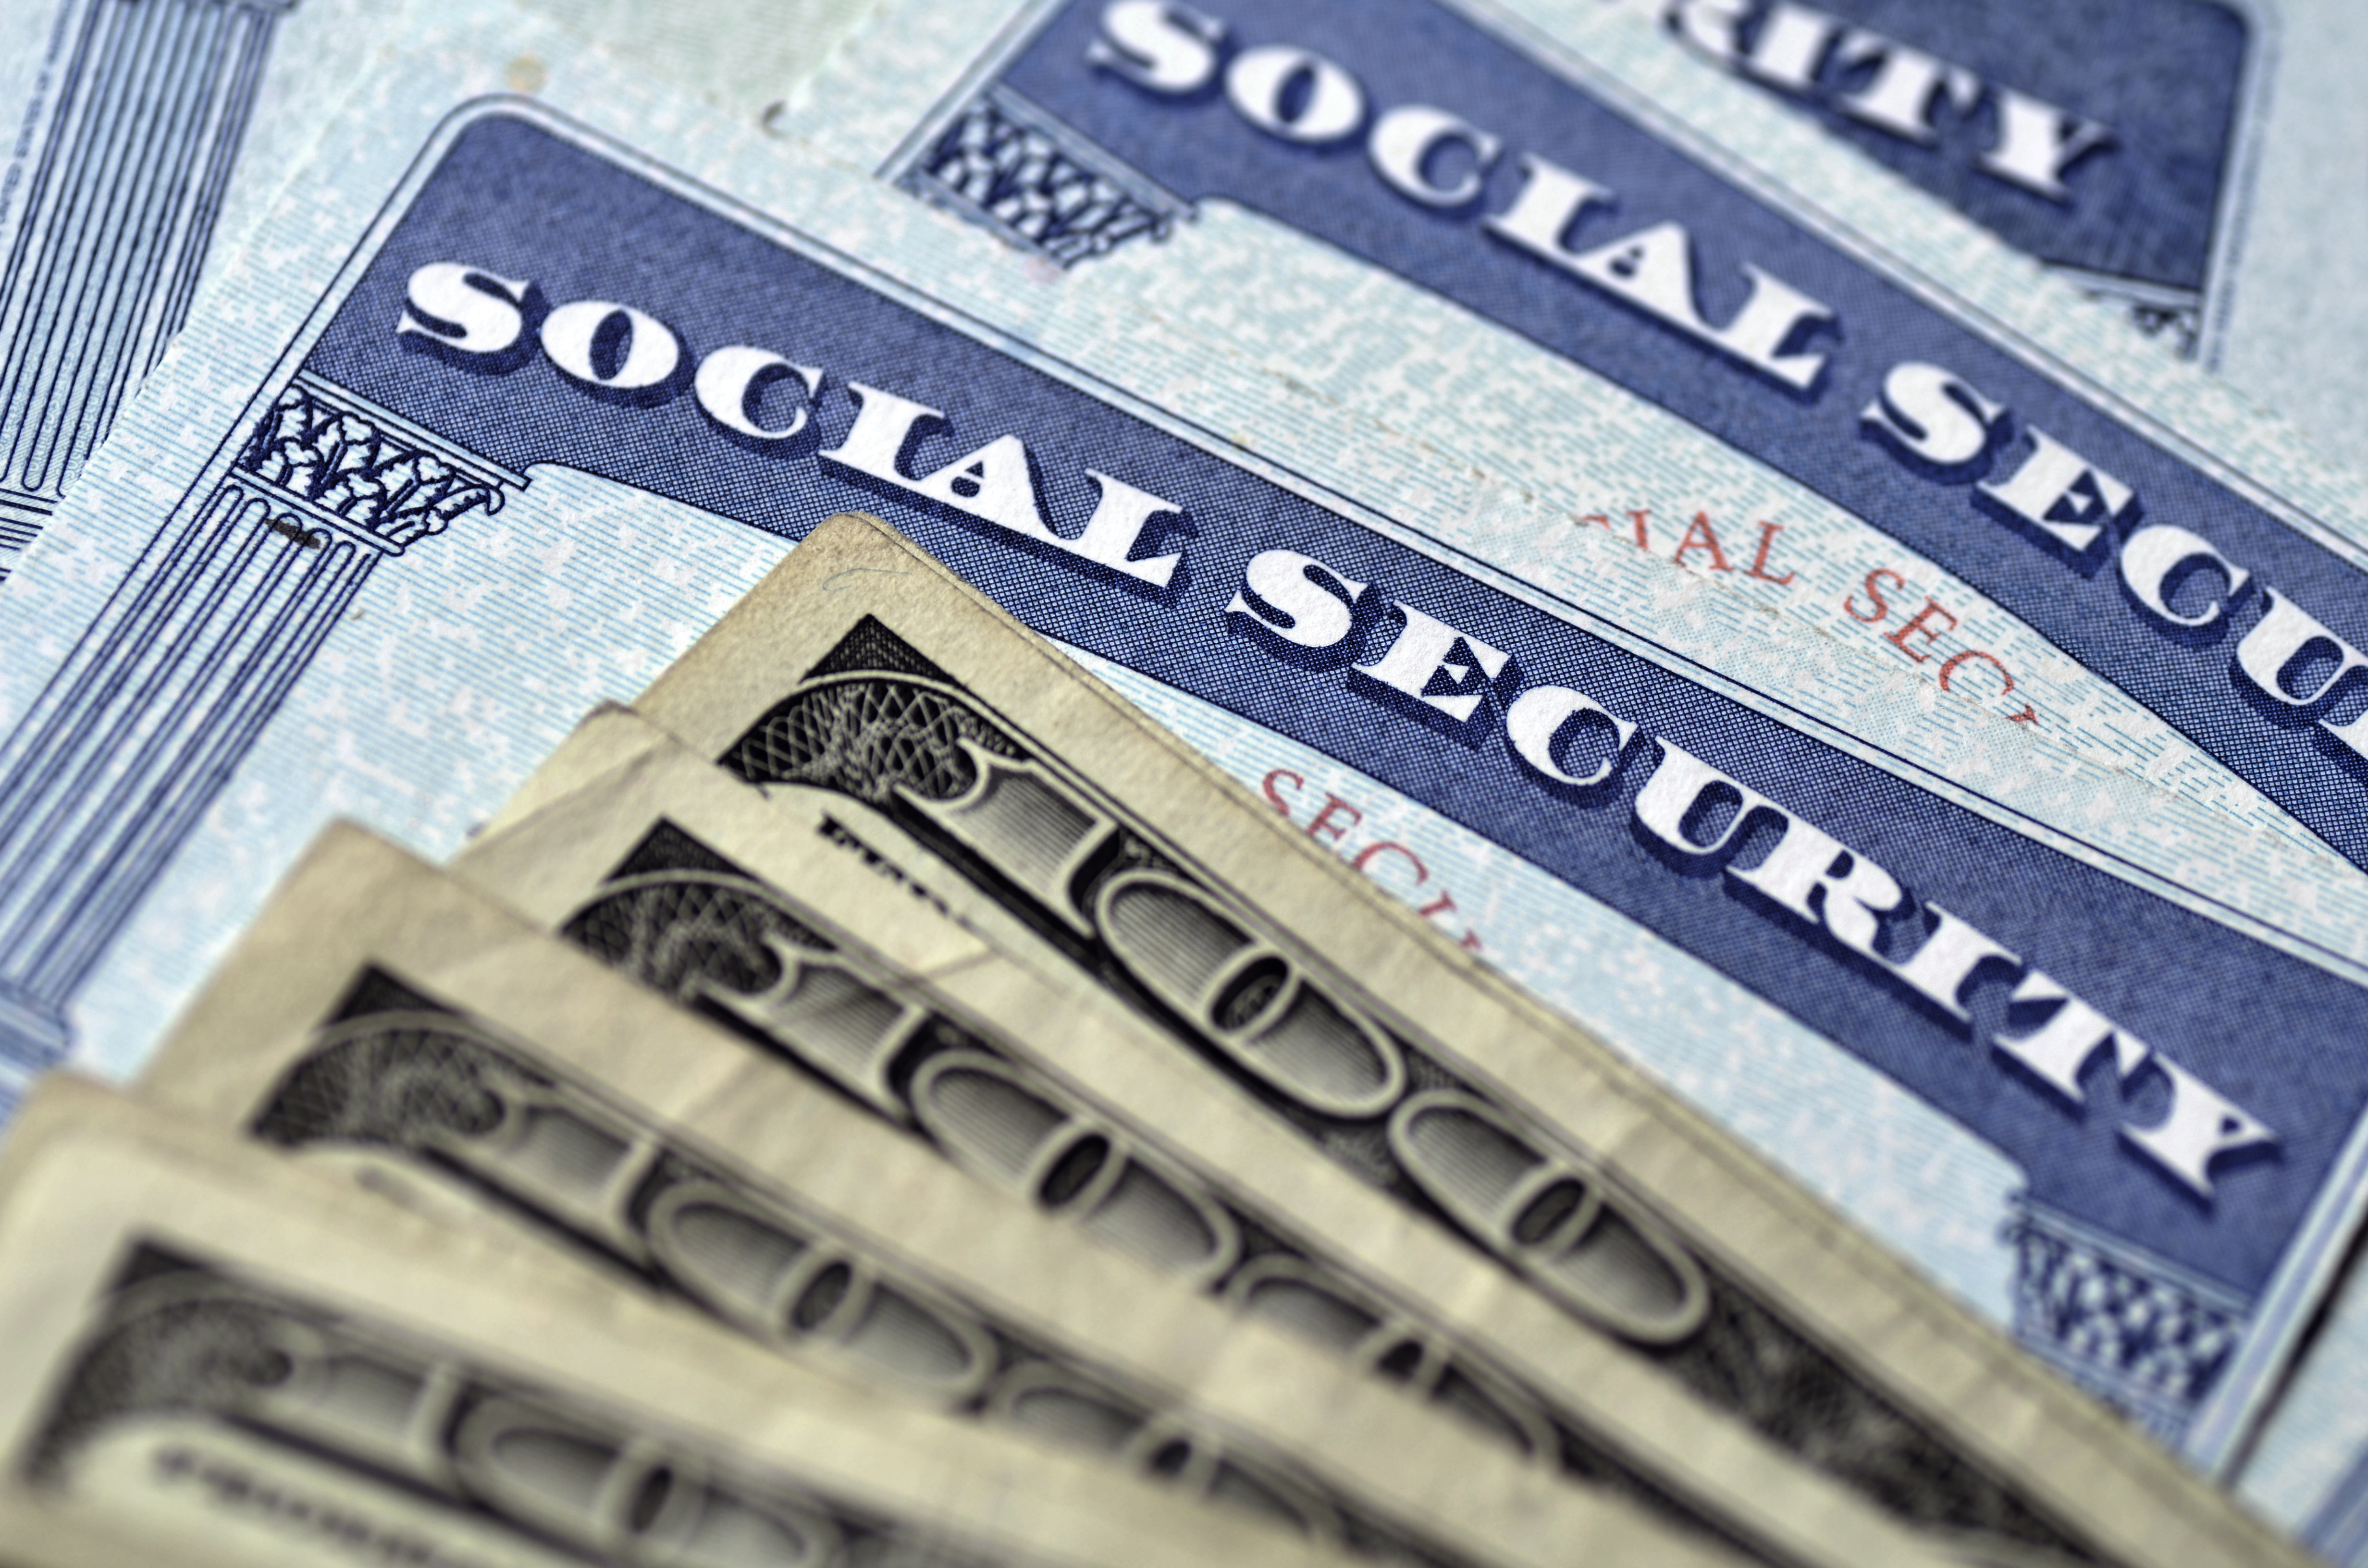 "Social Security Is a Joke" And Other Feedback From Our Readers